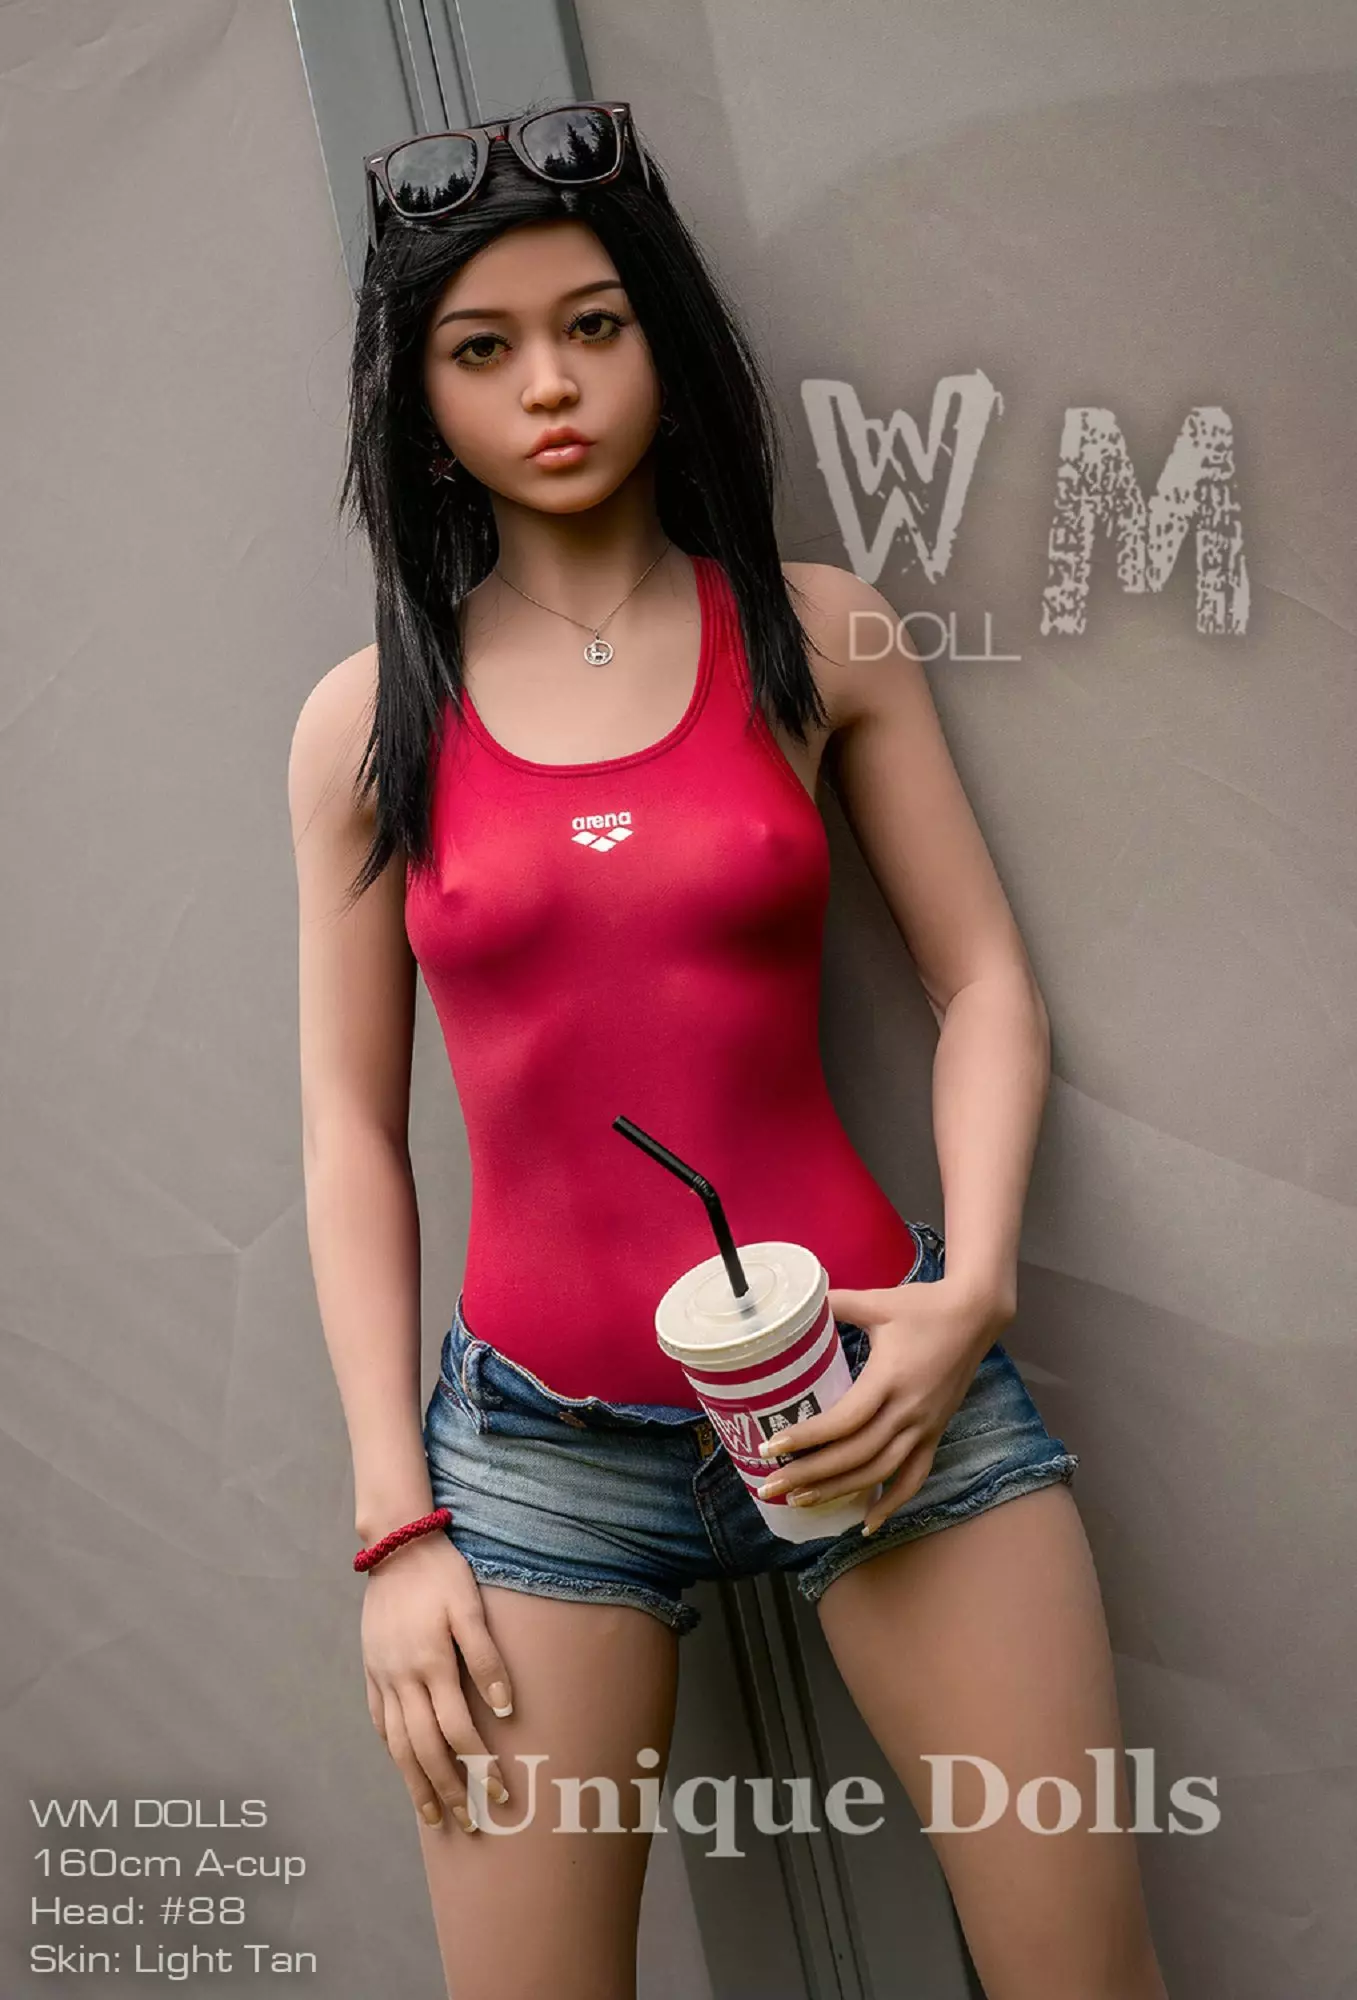 WM Doll 160cm A cup real sexy doll with #88 head